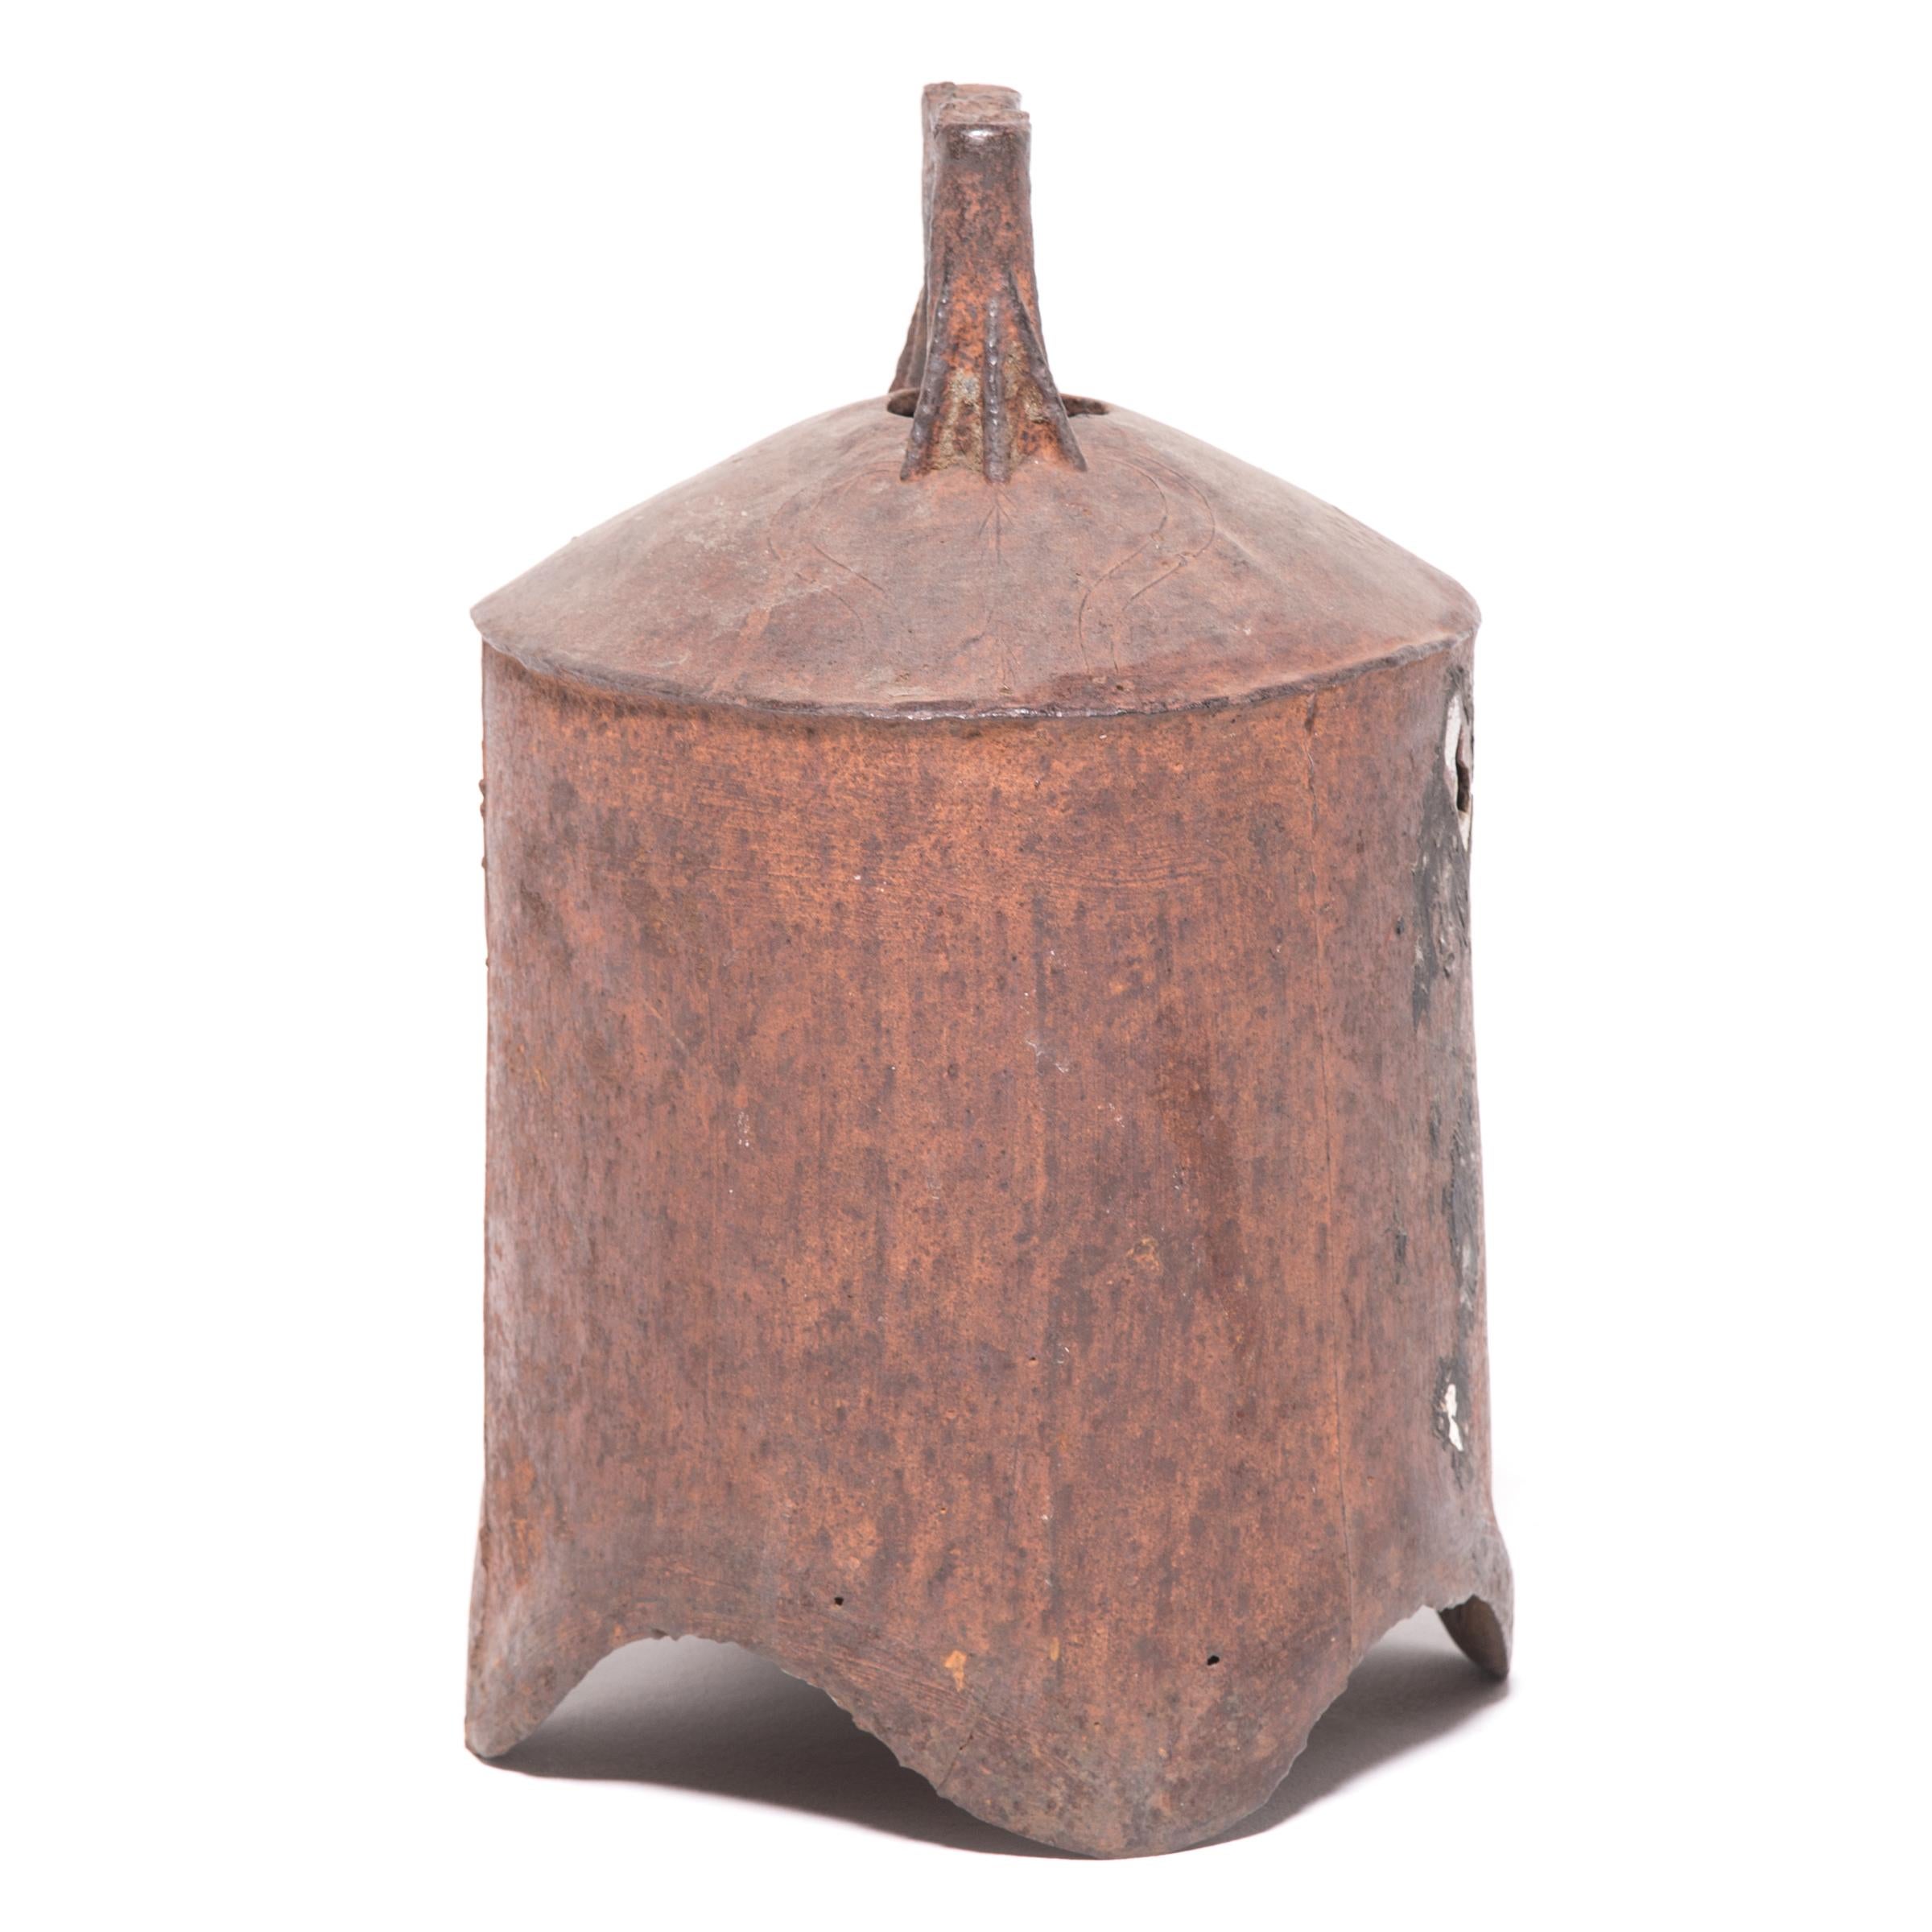 This rustic, 19th century iron bell once pealed in celebration or gave notice of important events in a town in northern China. The shoulder of the bell is adorned with subtle decorations, including a fish in low relief, a symbol of wealth and